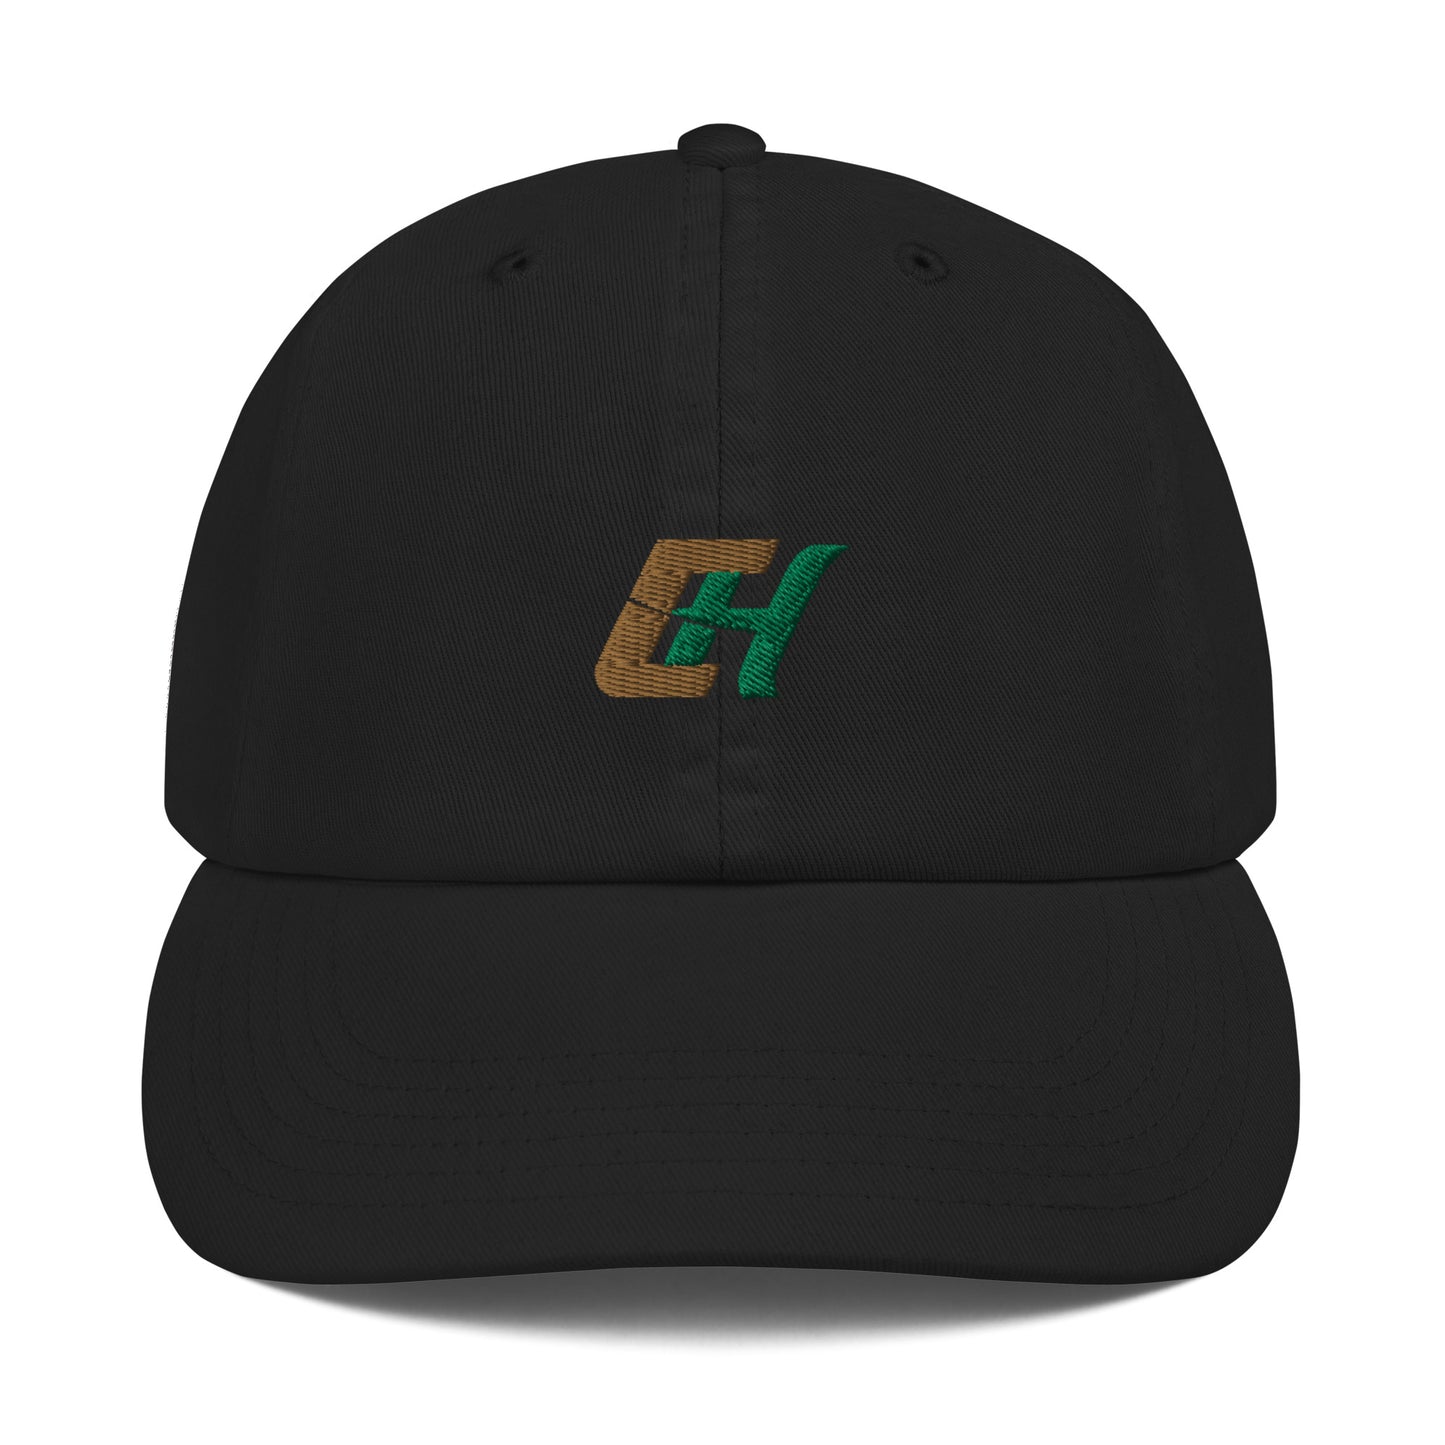 CH Embroidered Champion Dad Cap